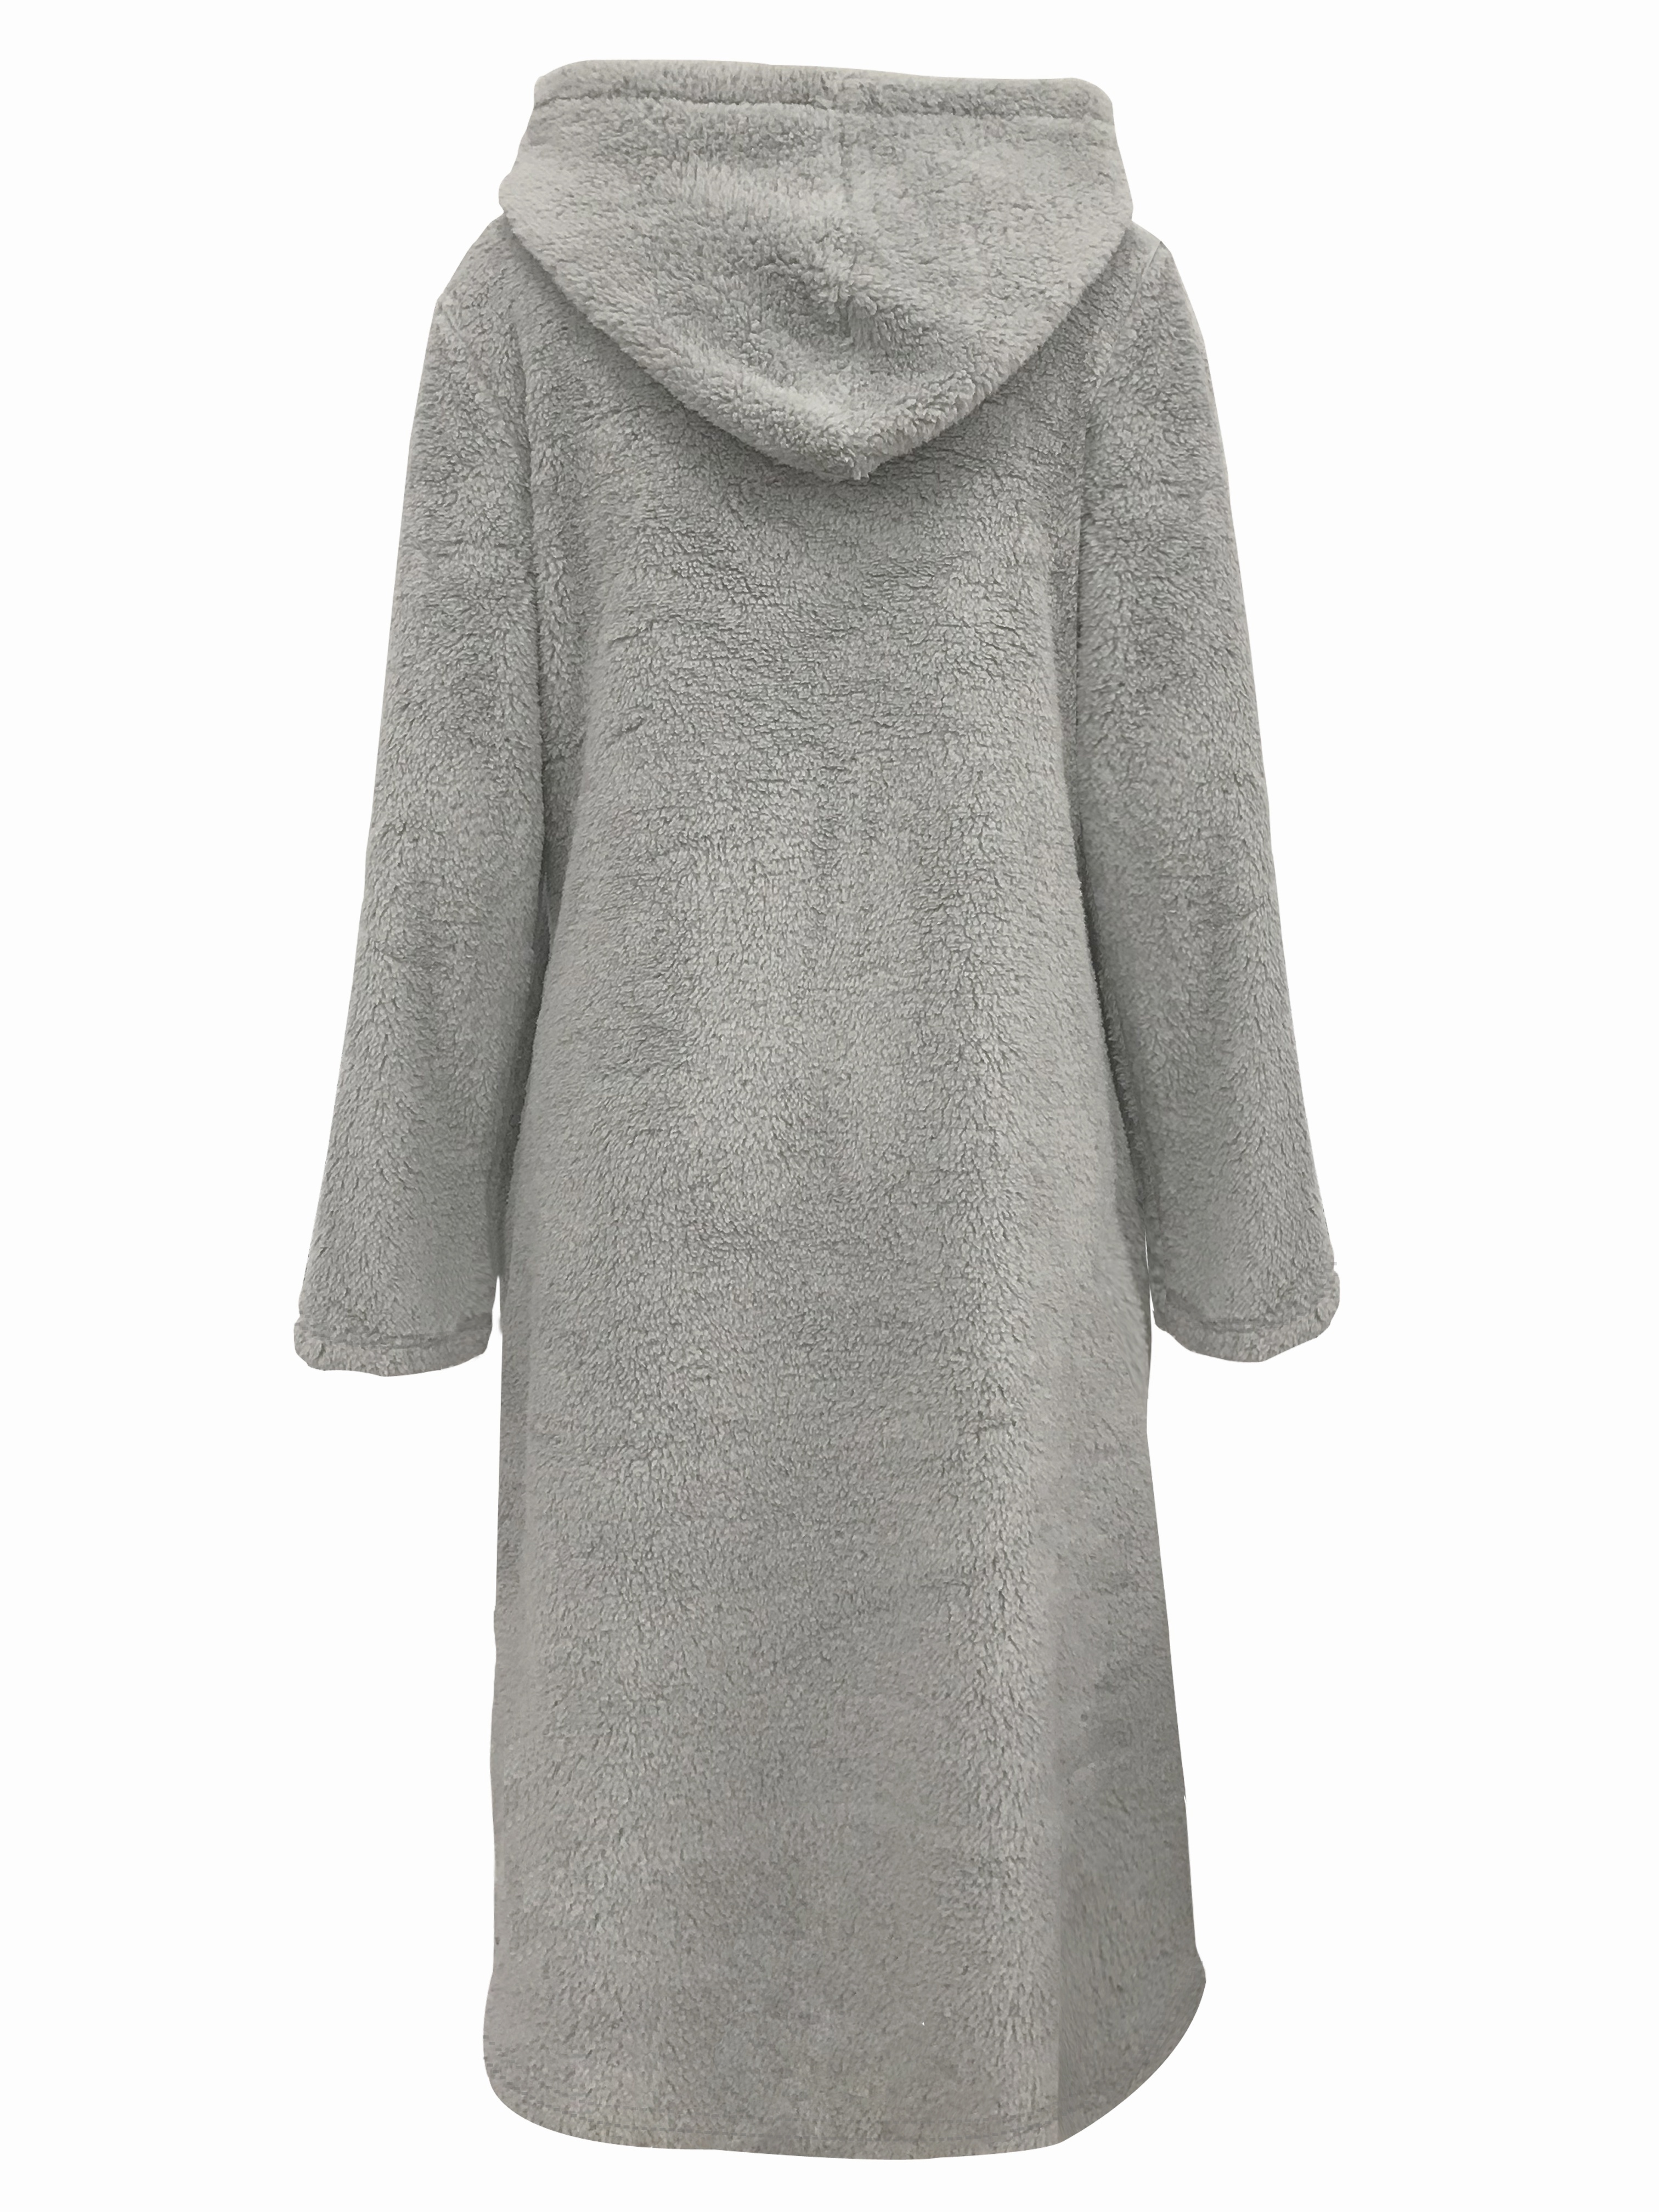 teddy hooded dress casual long sleeve winter warm dress womens clothing details 4